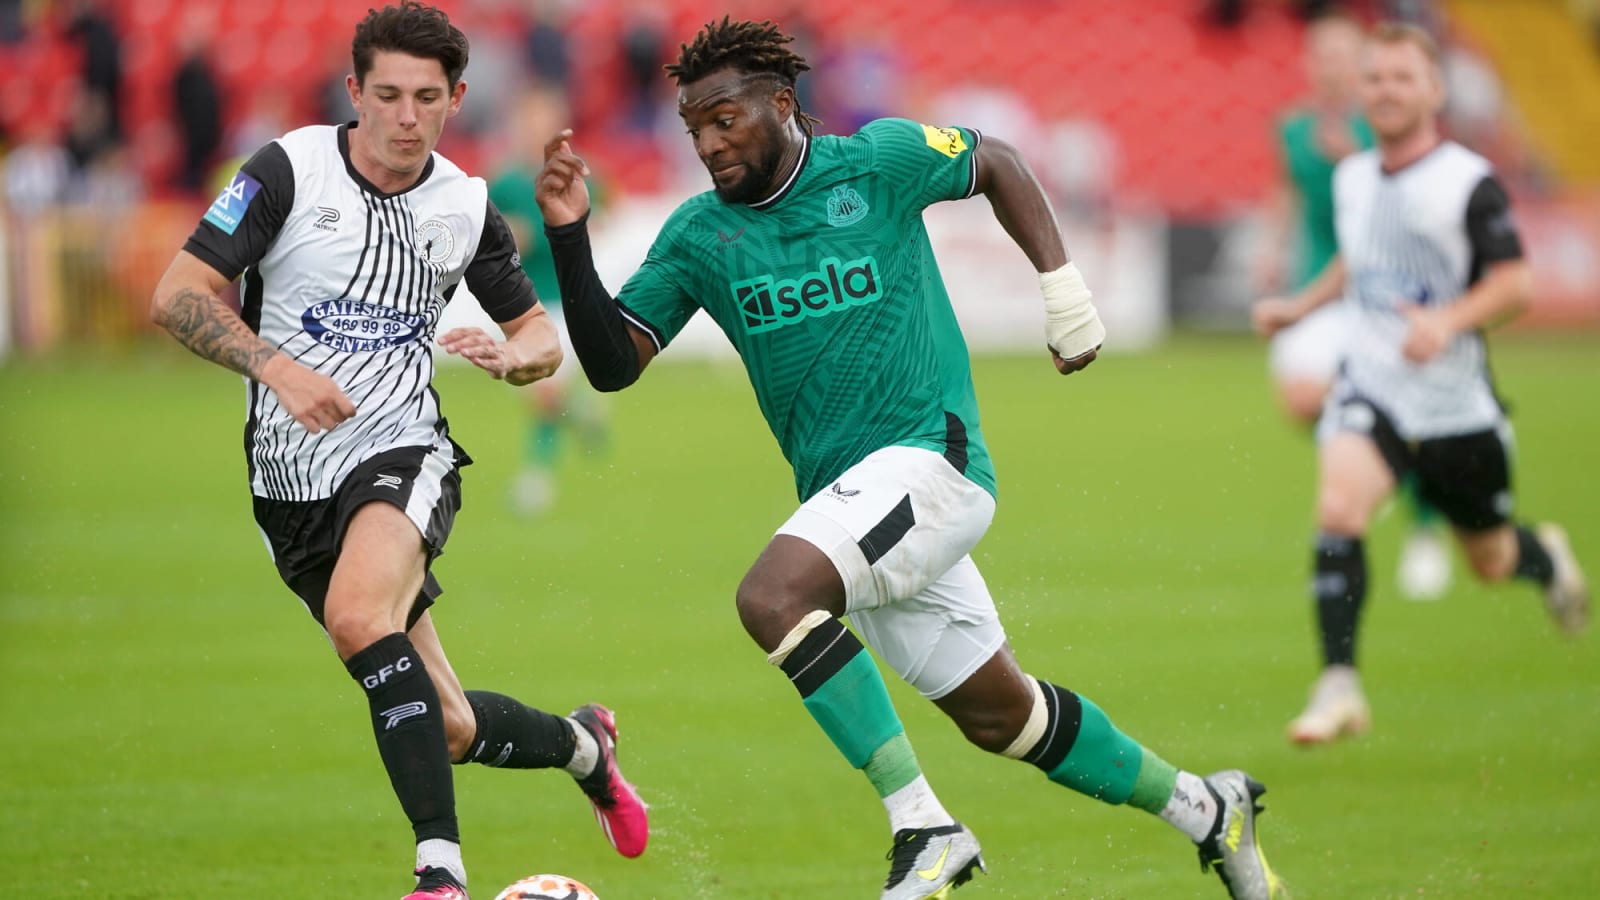 Newcastle United's Allan Saint-Maximin posts emotional message to fans